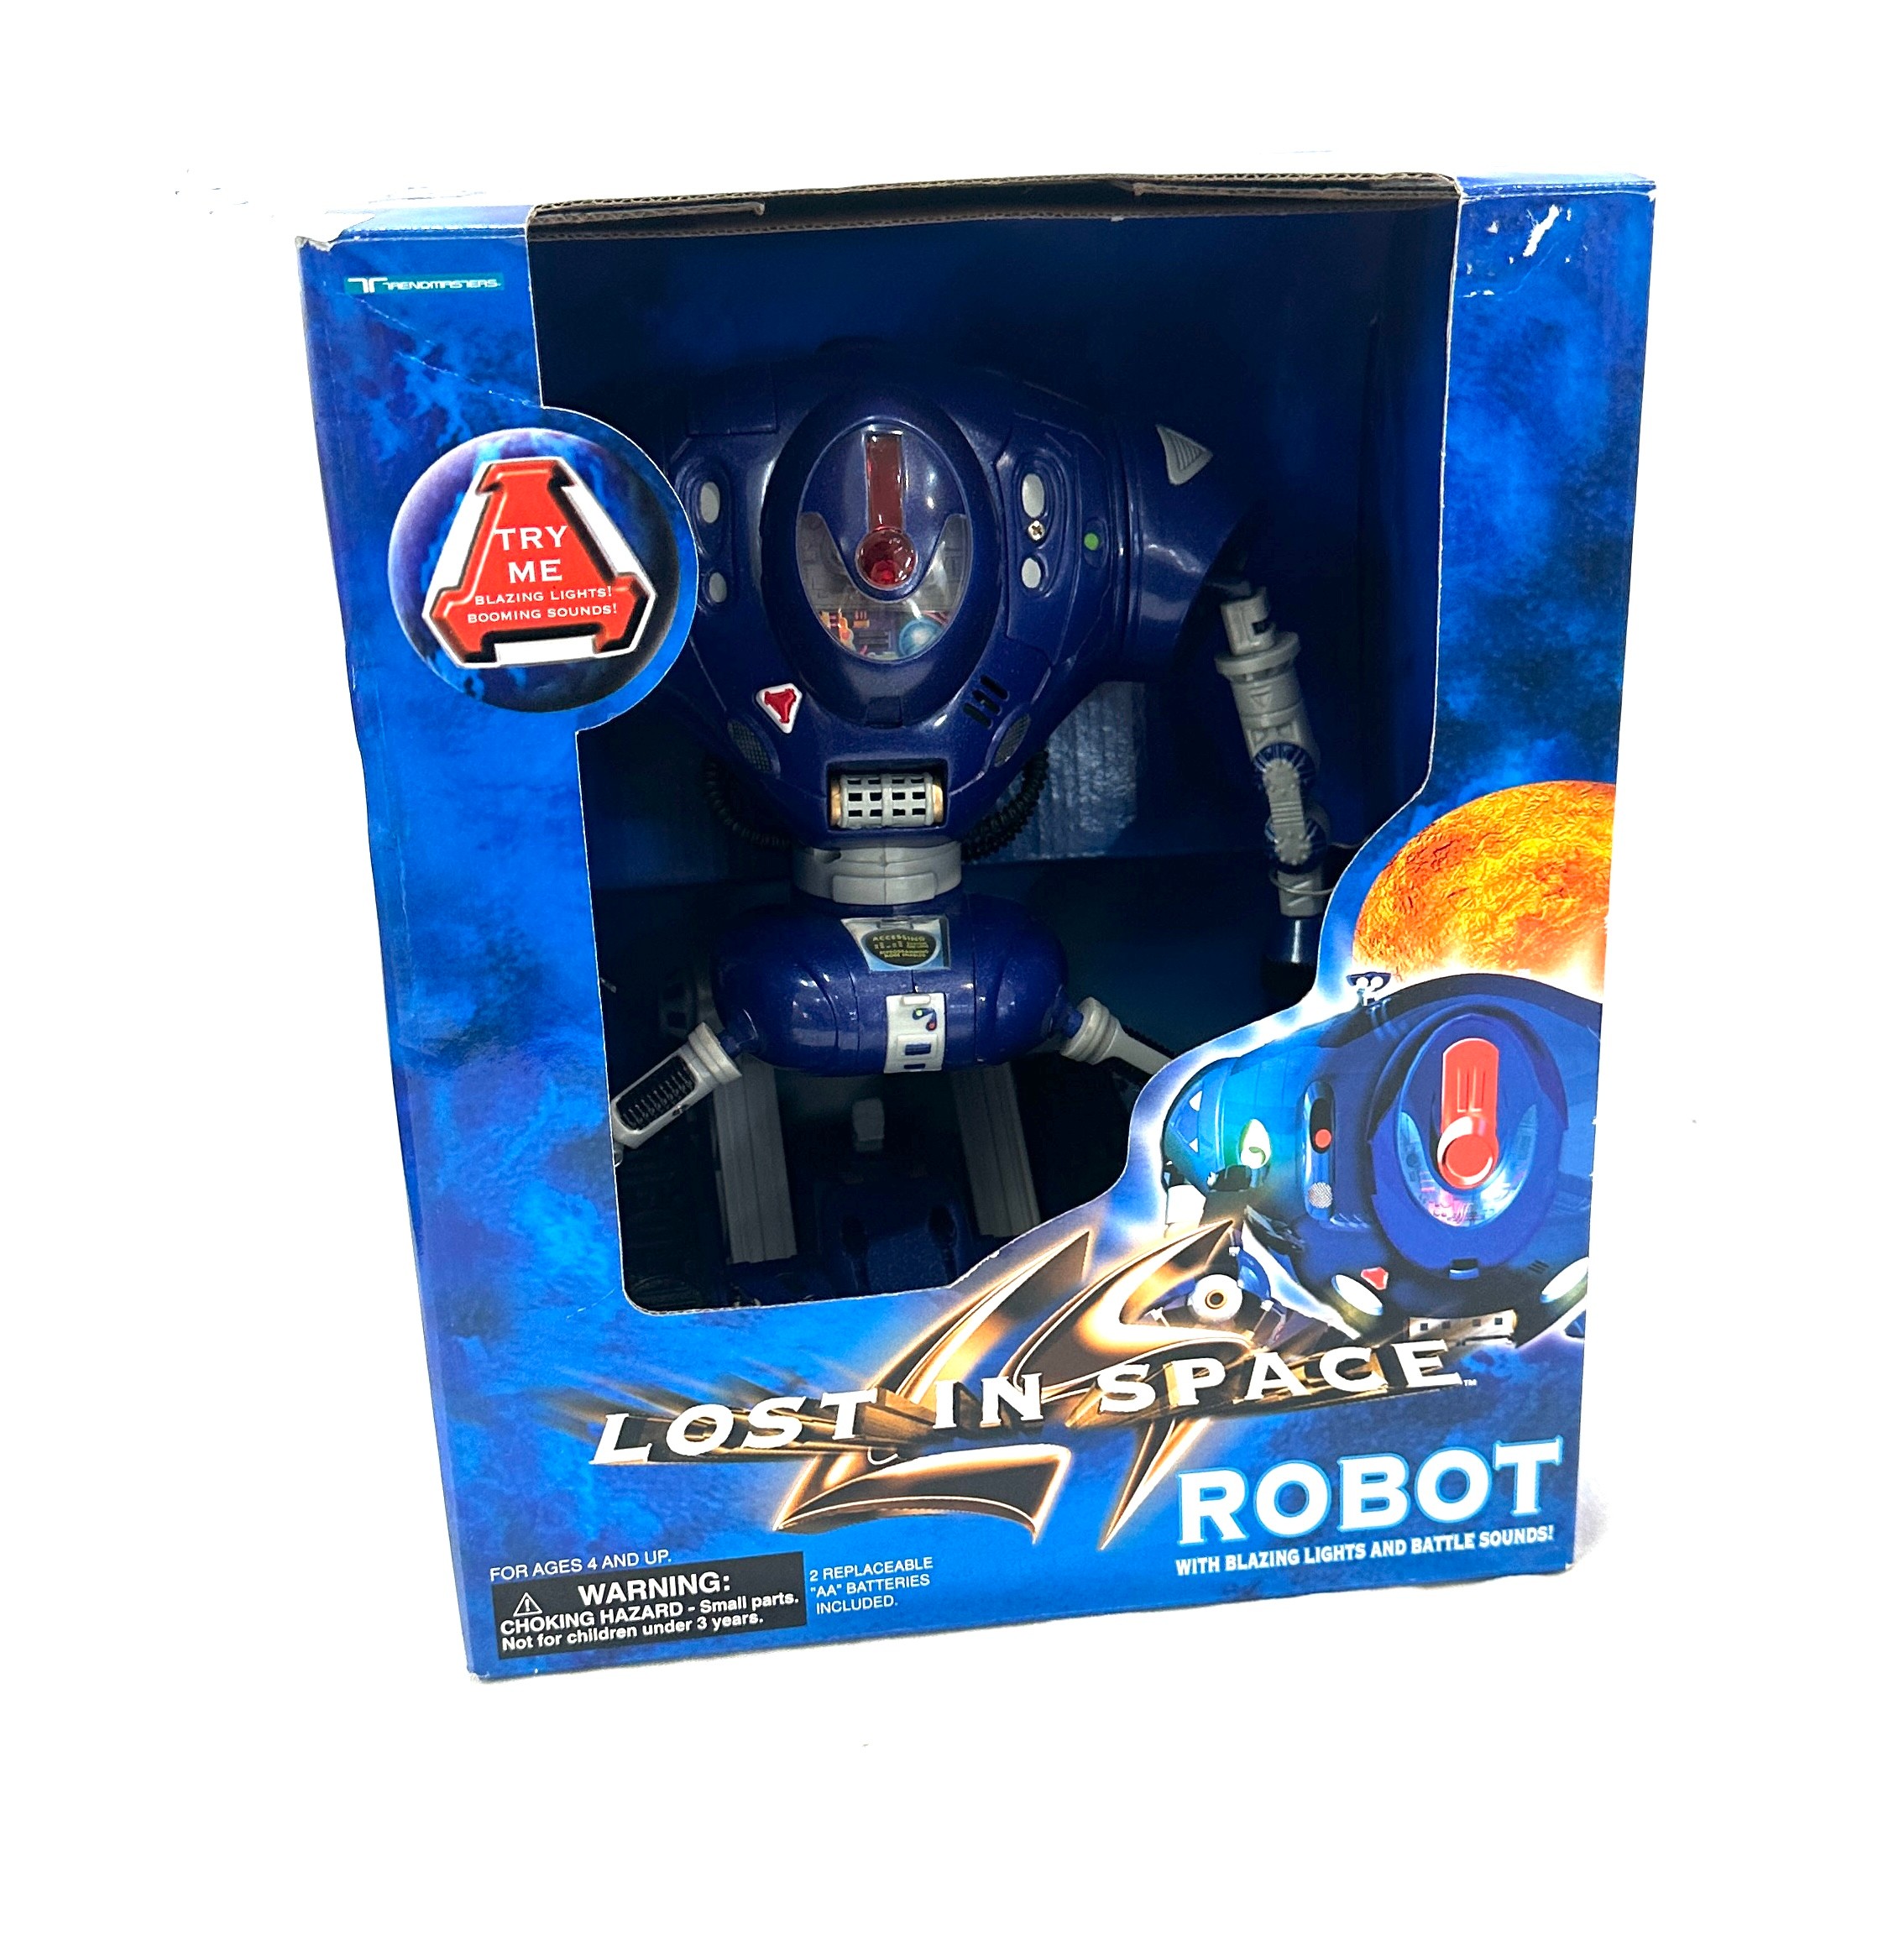 Original boxed Lost in Space Robot, - Image 2 of 3